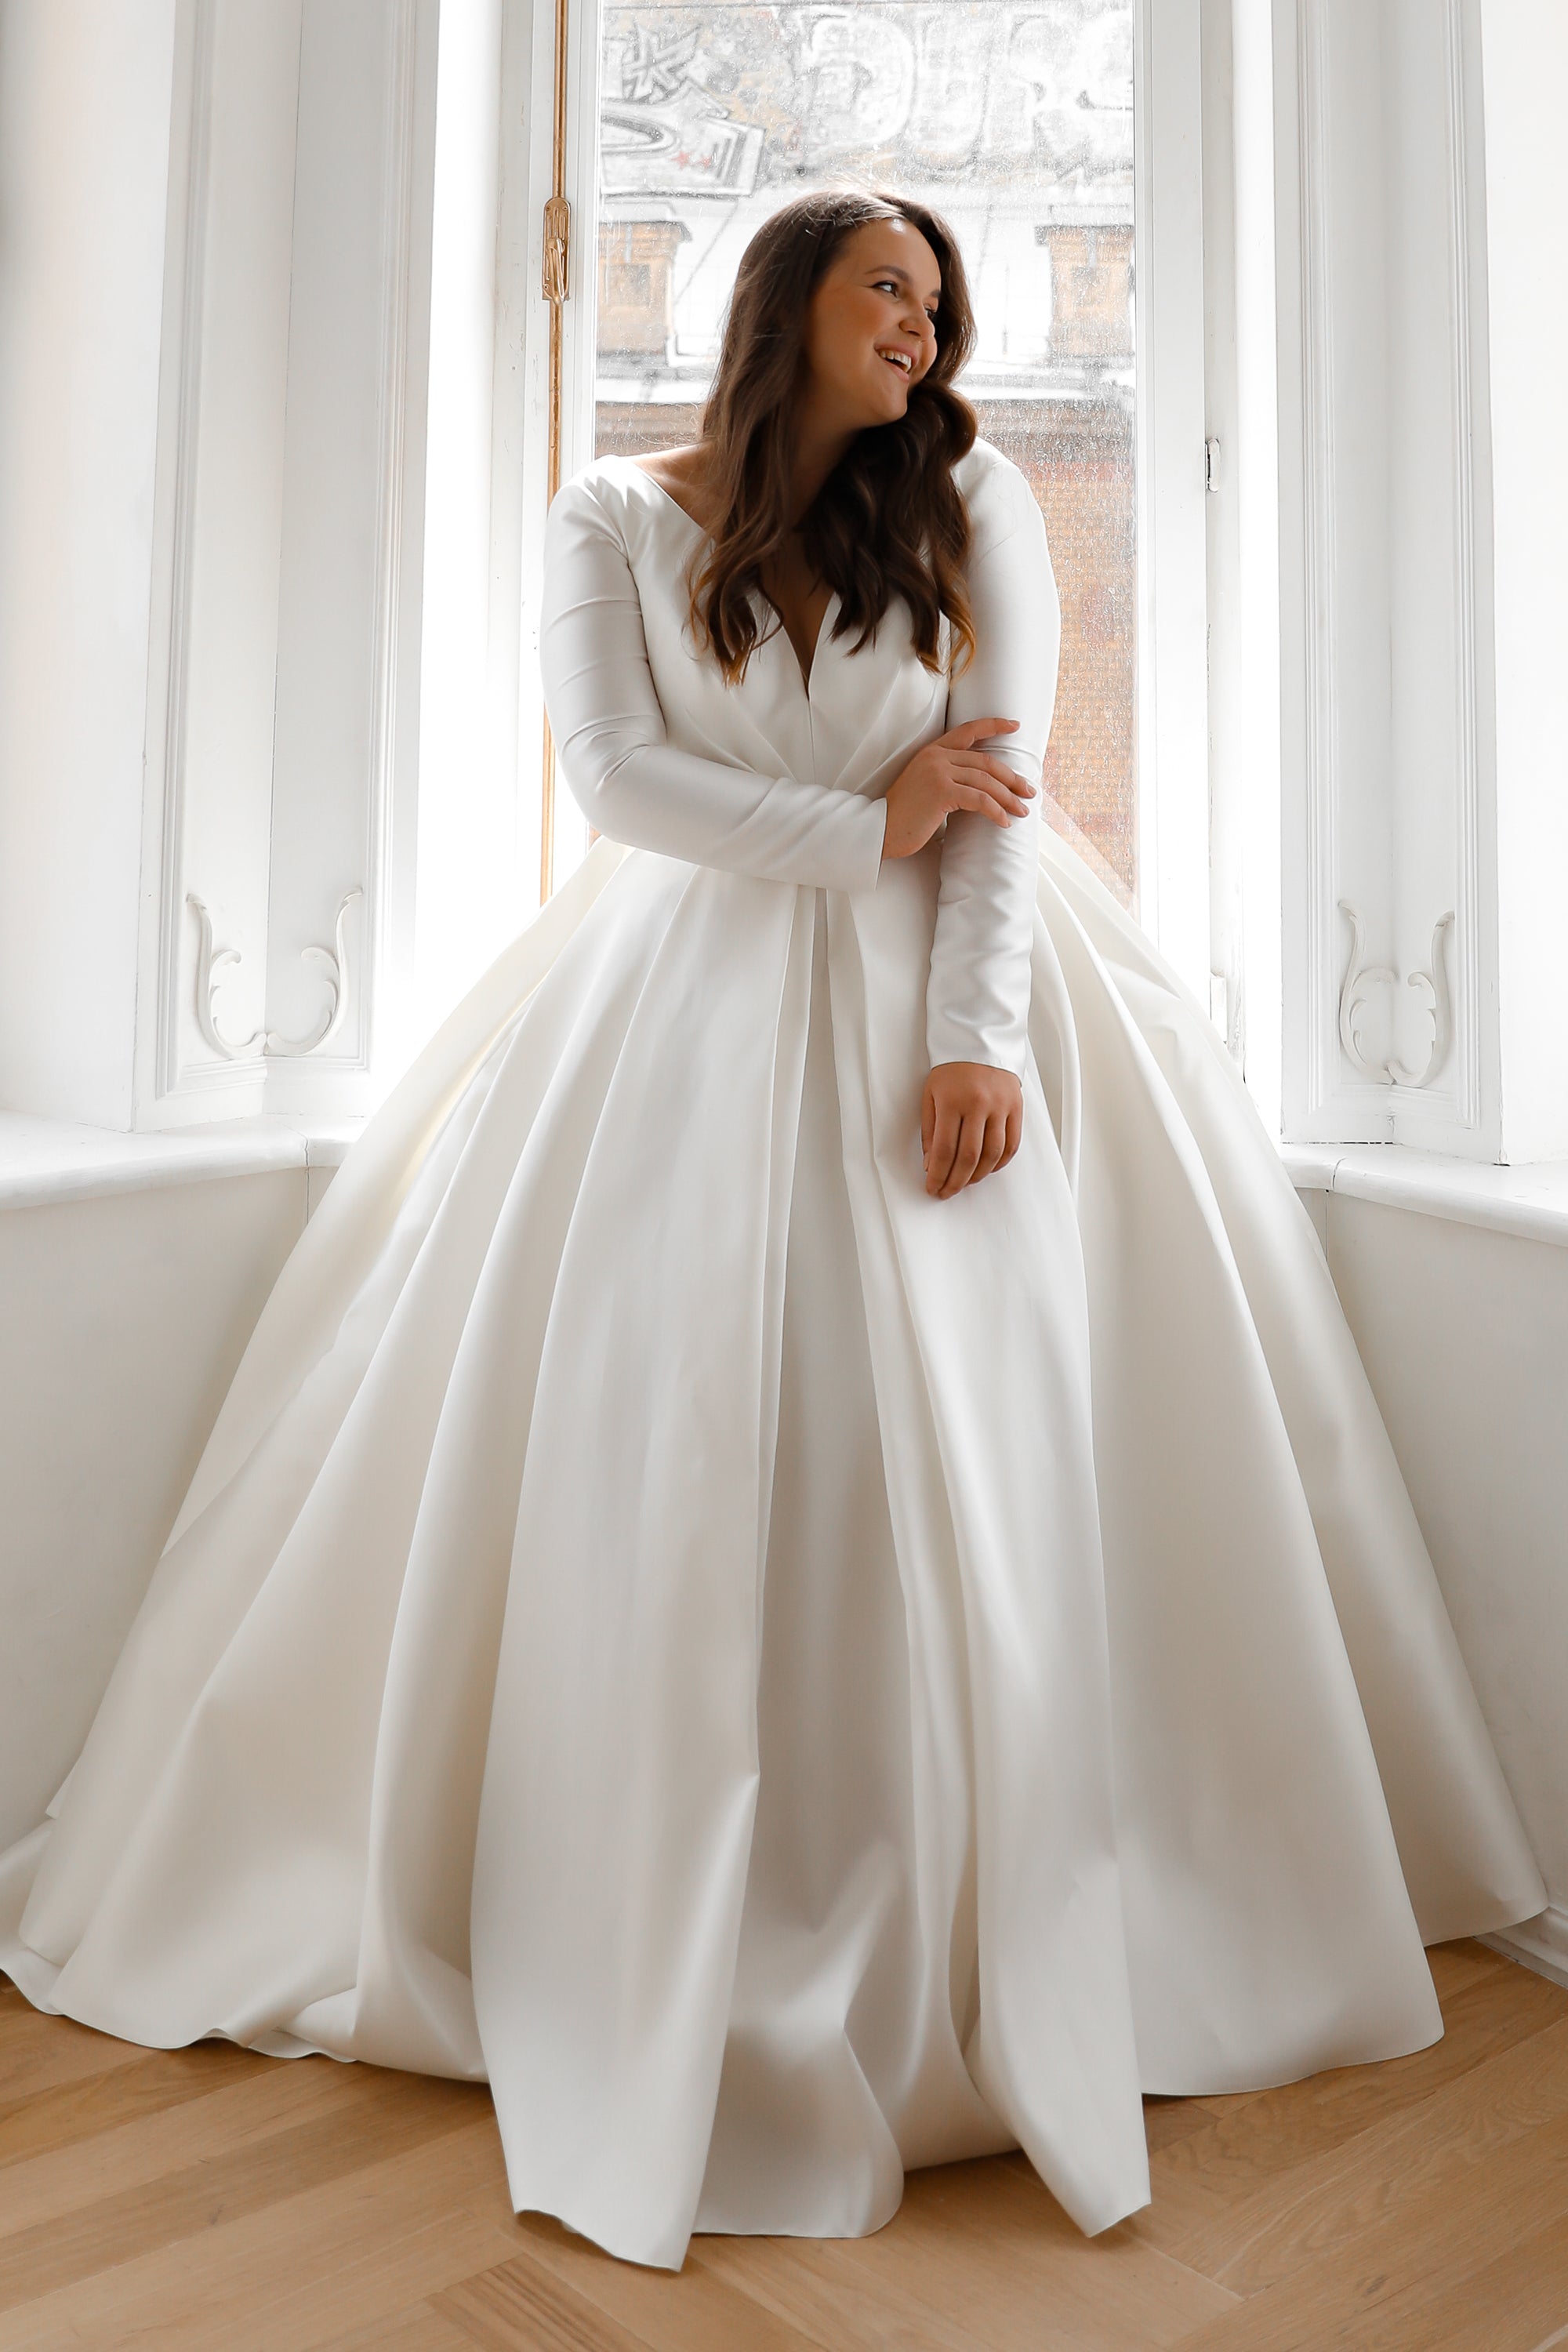 Plus Size | Pearl's Place Wedding and Bridal Gowns